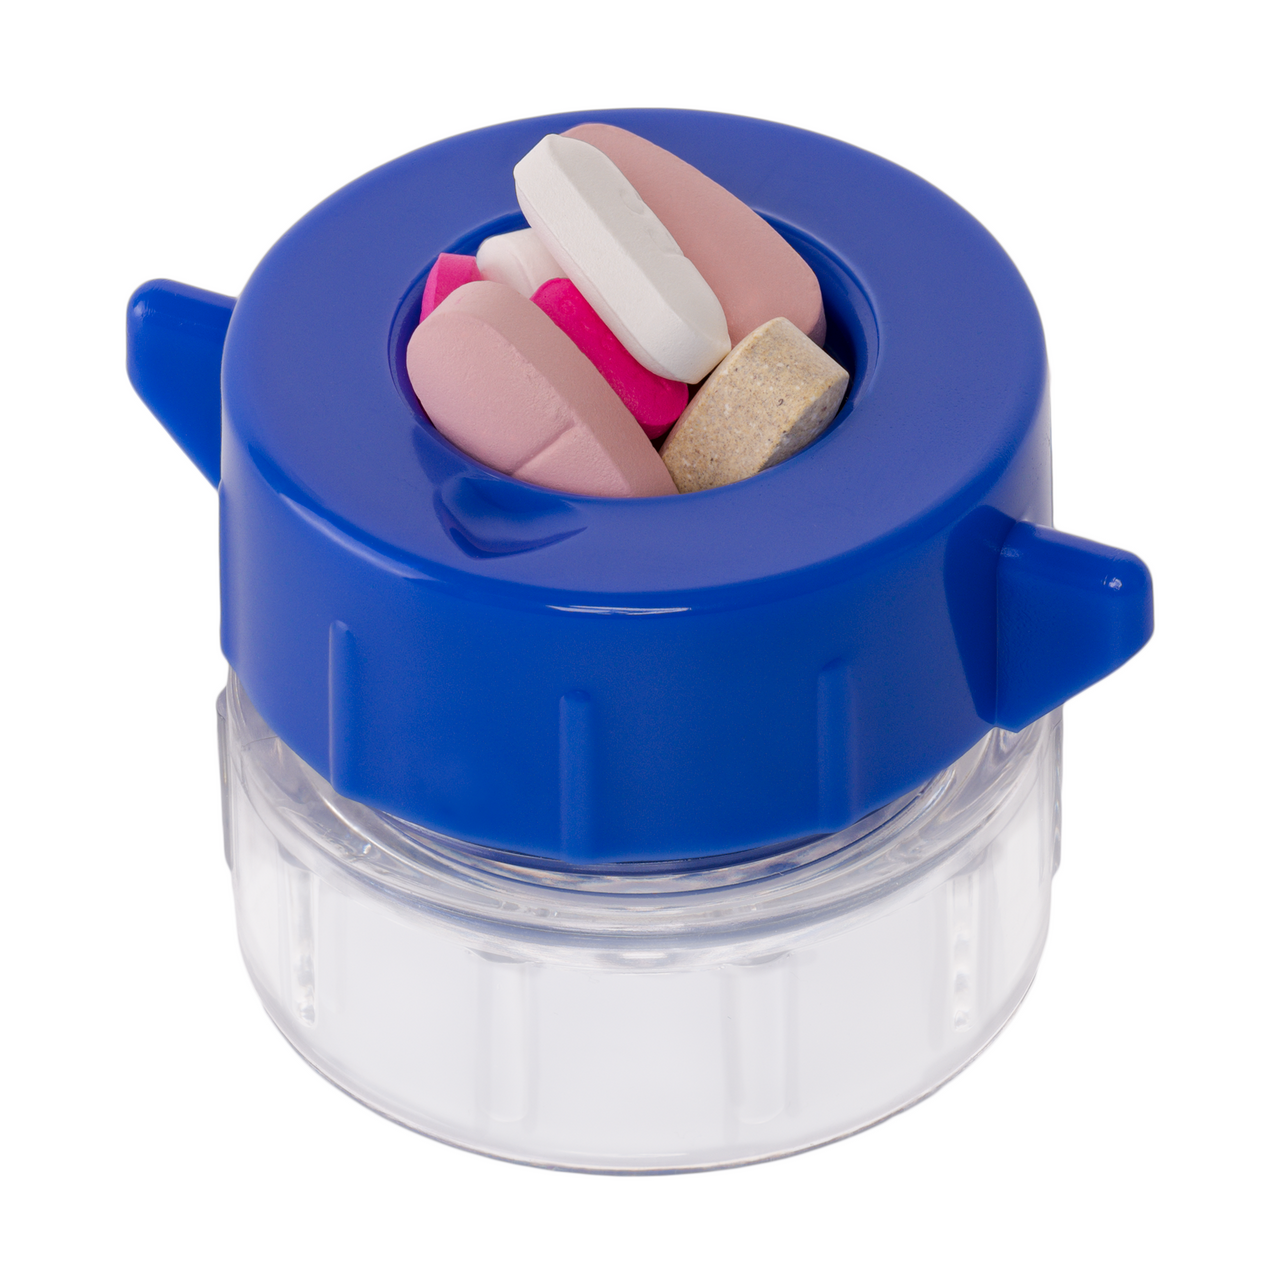 Pill Crusher Cutter and Grinder Combo with Drinking Cup Storage by Easycare